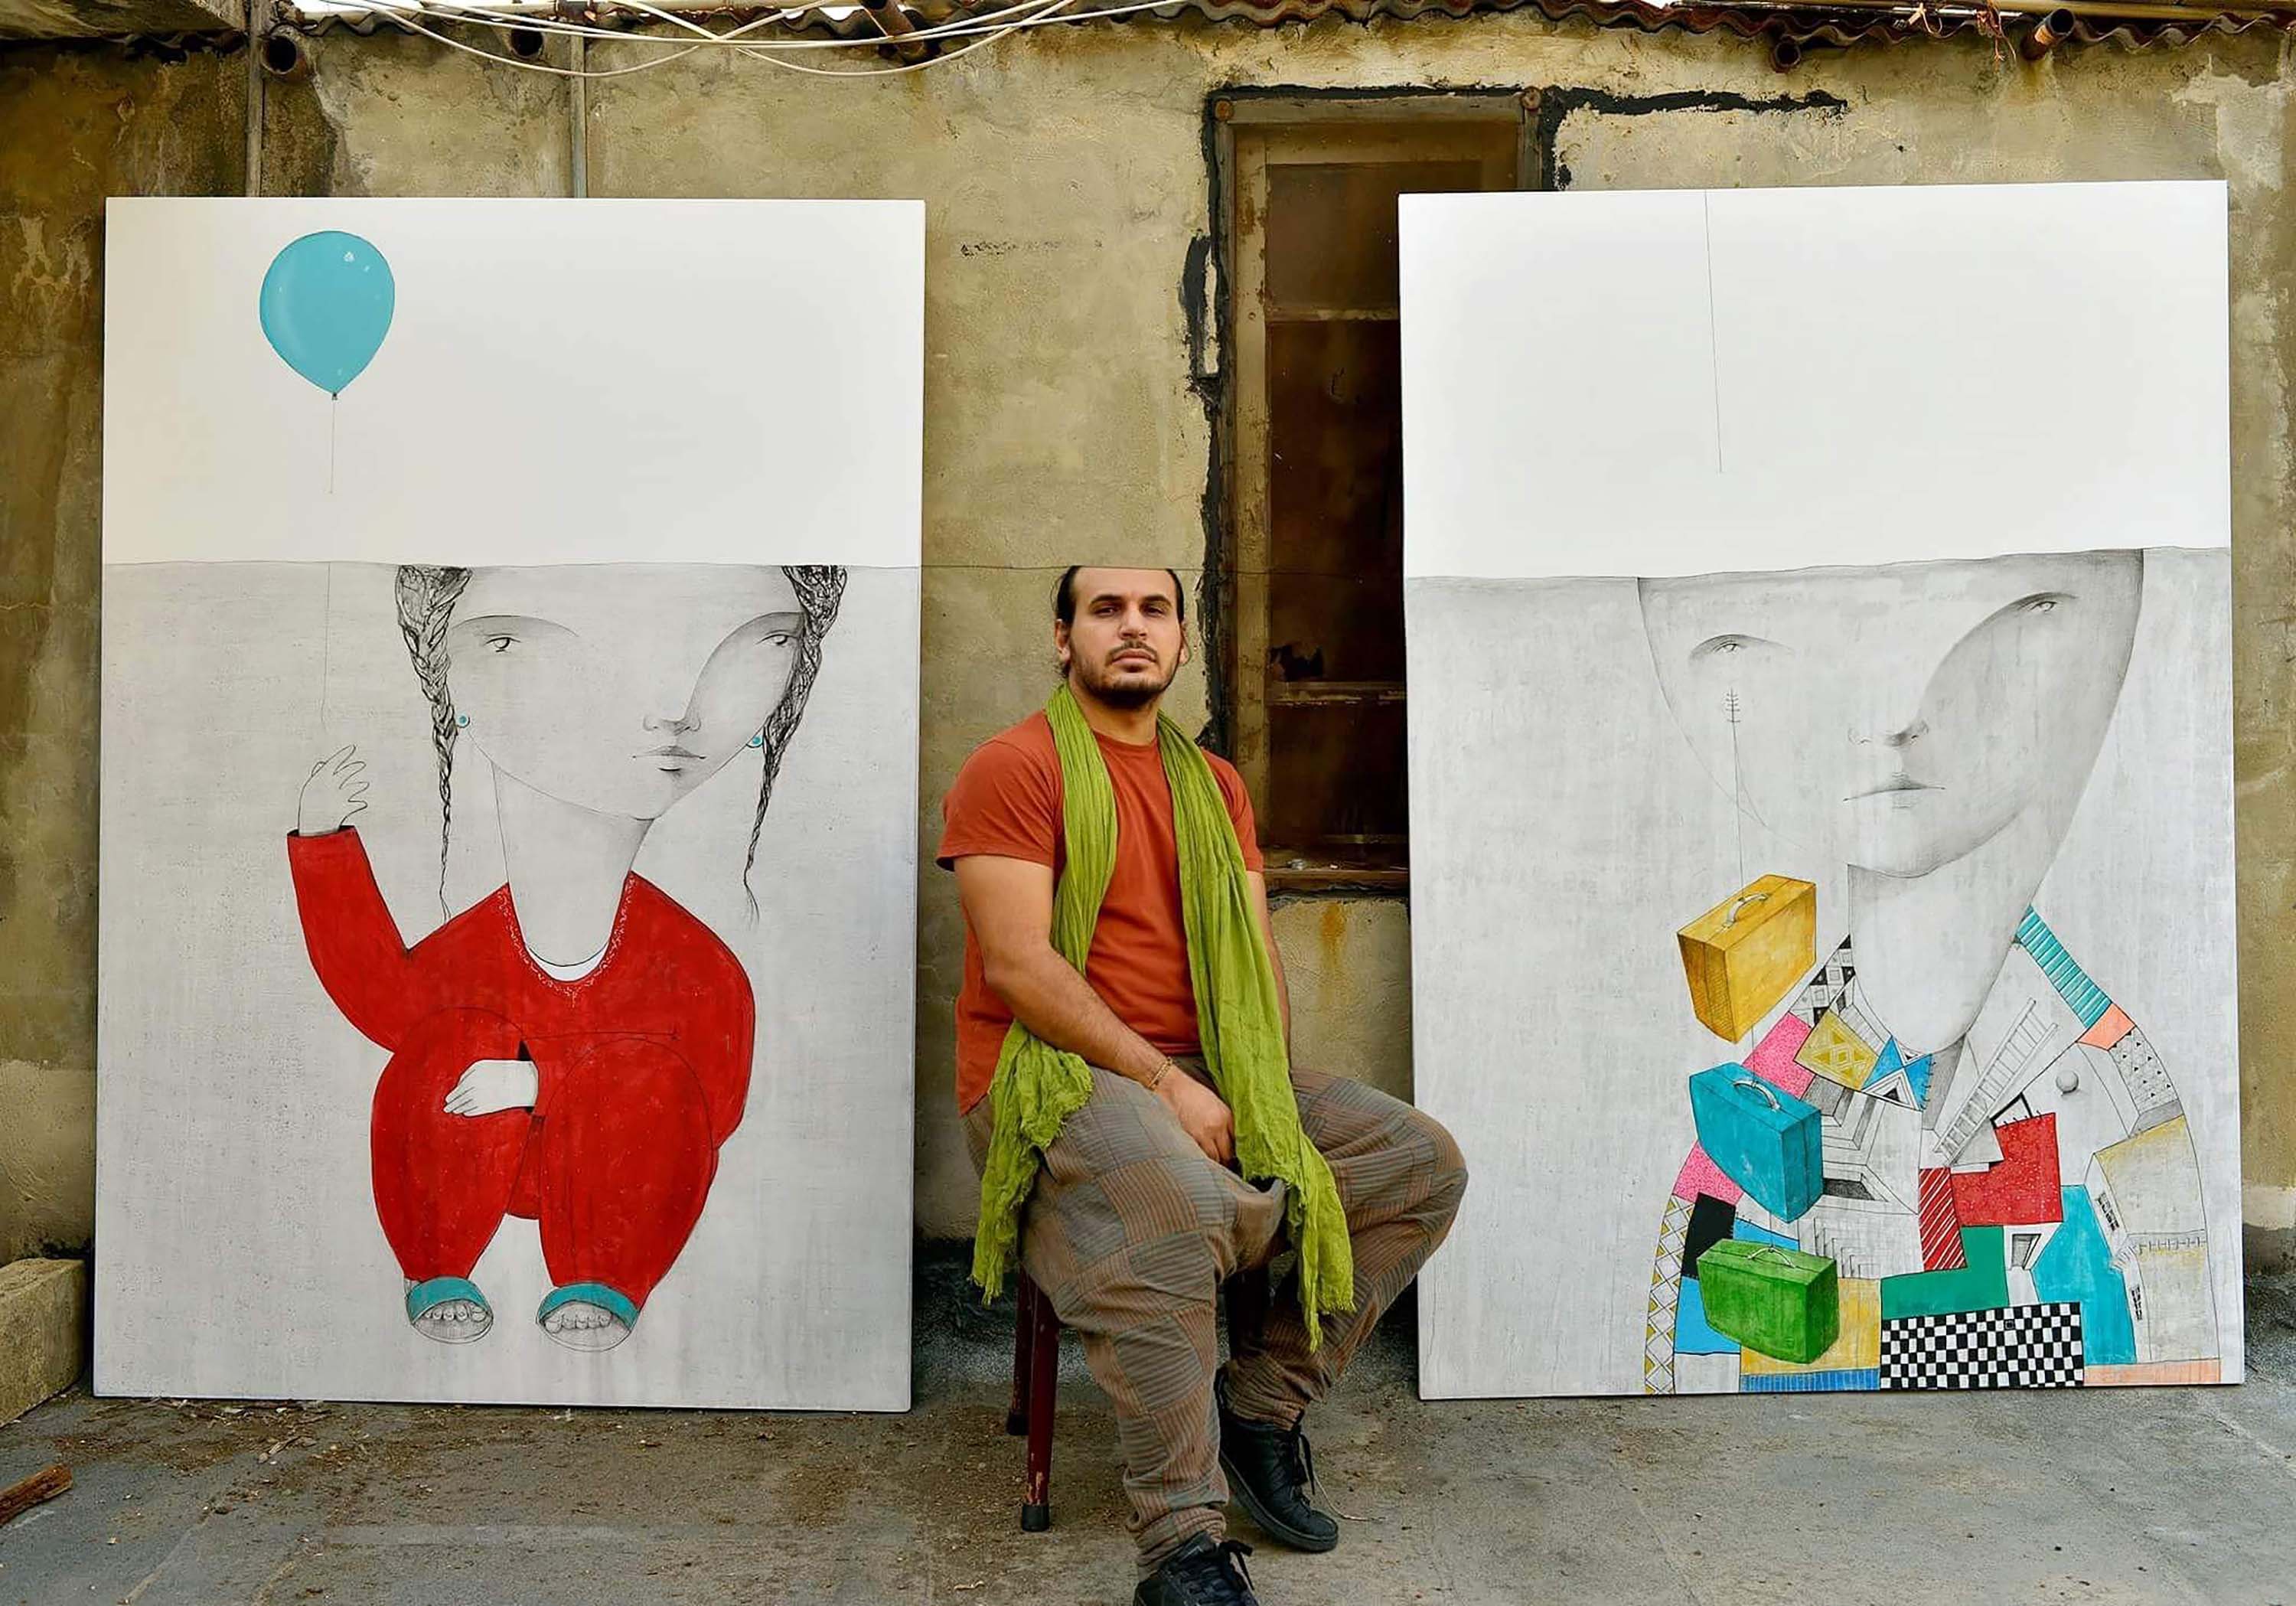 Mohamad Kahyata sits between two of his works of art on large white canvases. He is wearing an orange shirt and green scarf and has a short beard. The artworks depict a sketched figure on each, with oversized heads and some painted color on their bodies. Their heads cut off along the same line as Khayata’s, creating a straight line across all three heads.